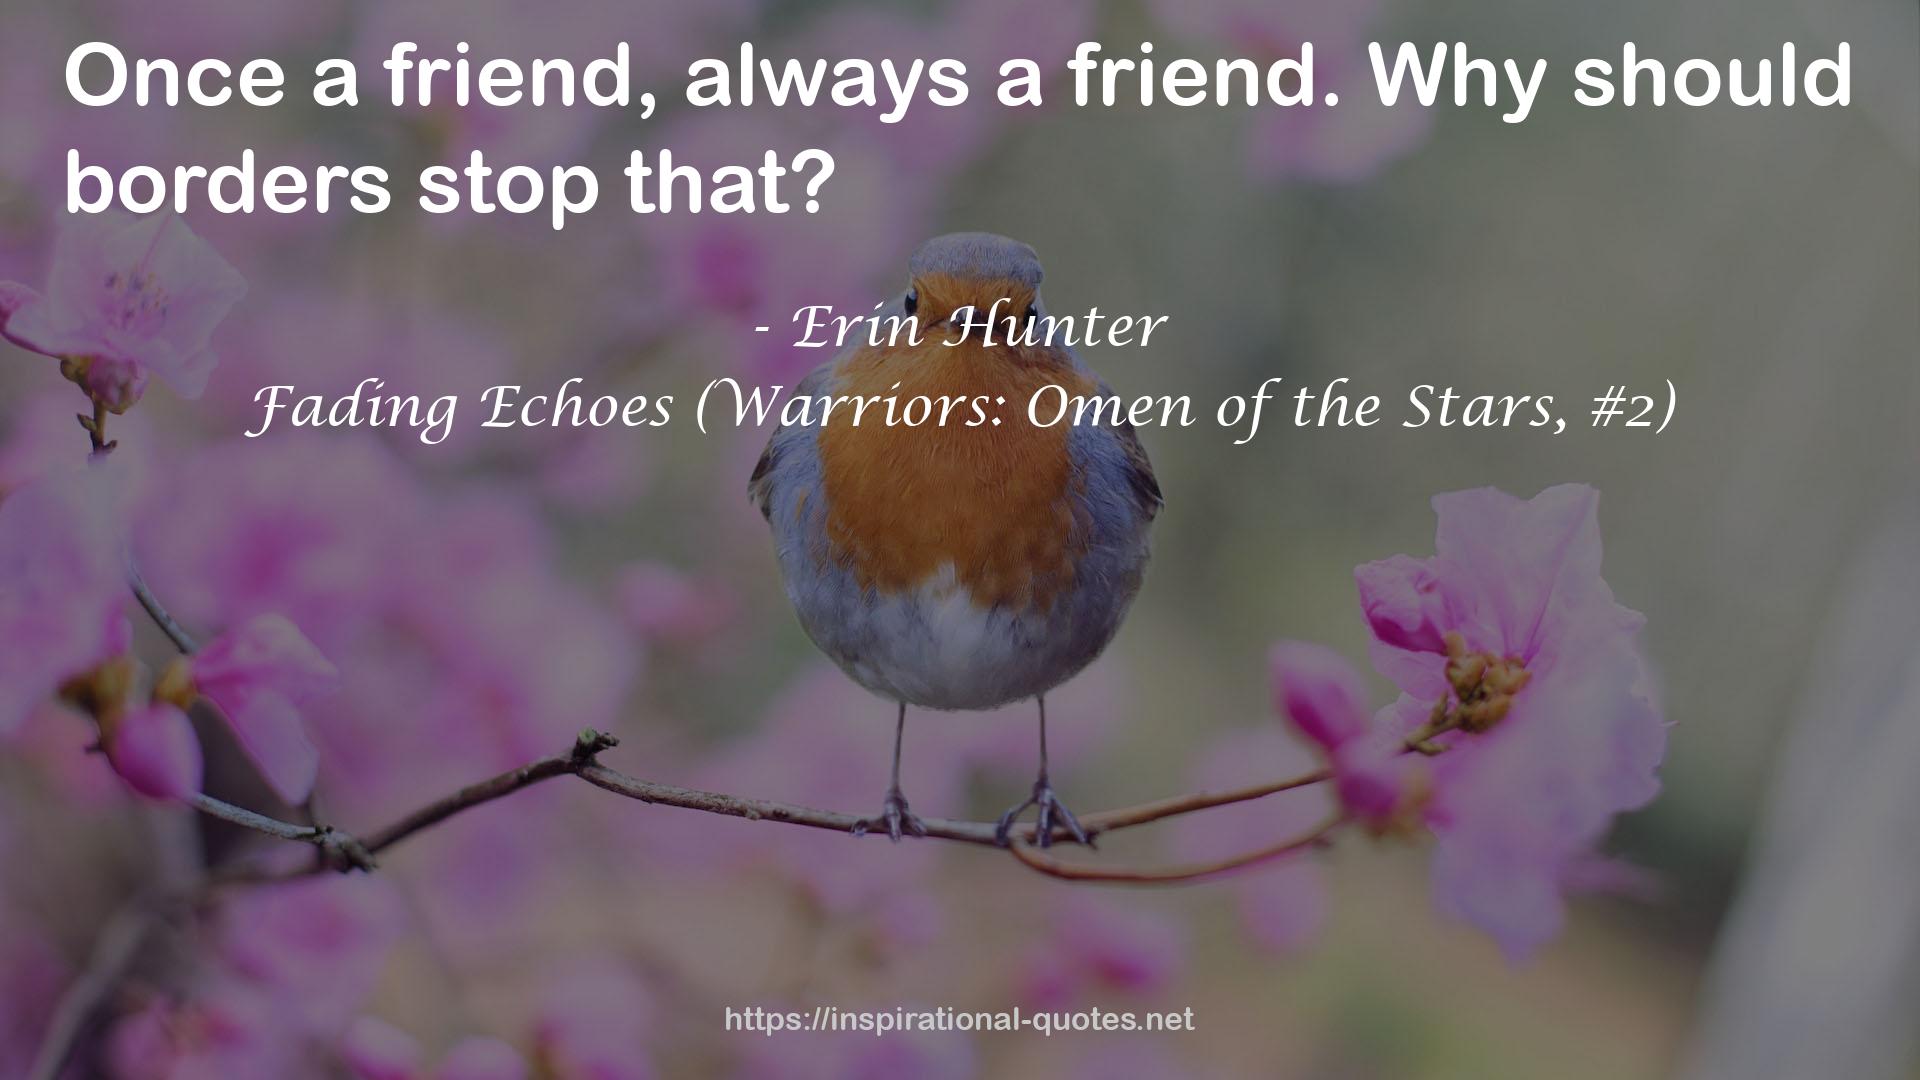 Fading Echoes (Warriors: Omen of the Stars, #2) QUOTES